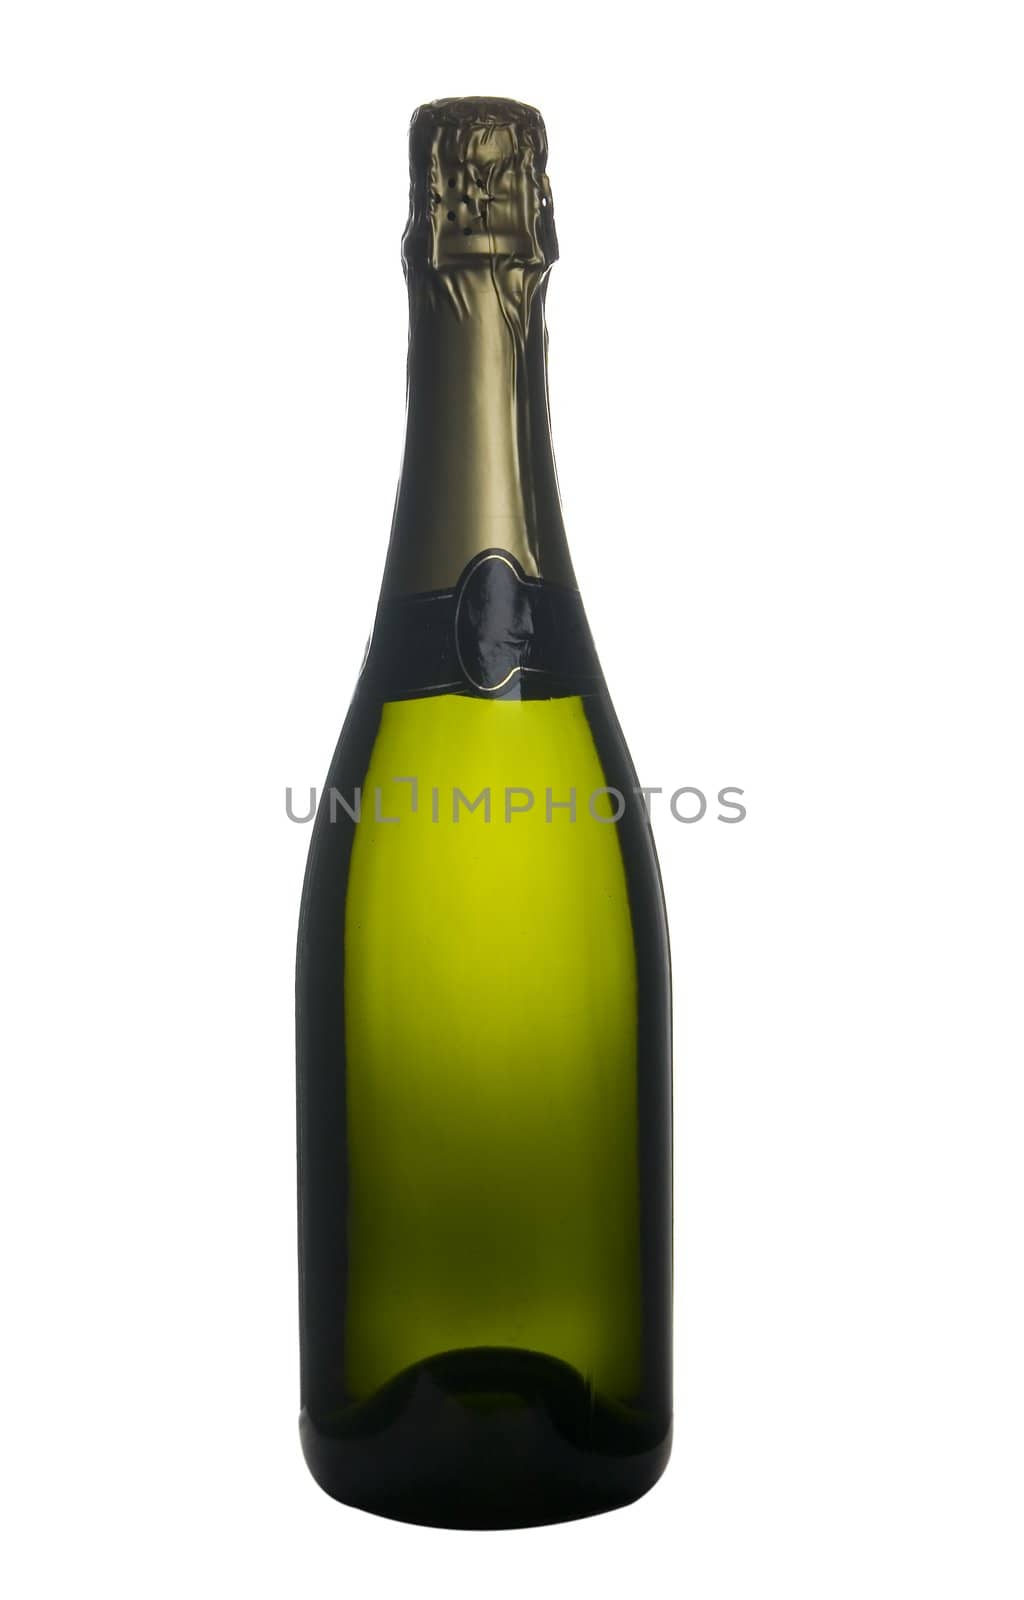 single bottle of champagne wine isolated on withe background